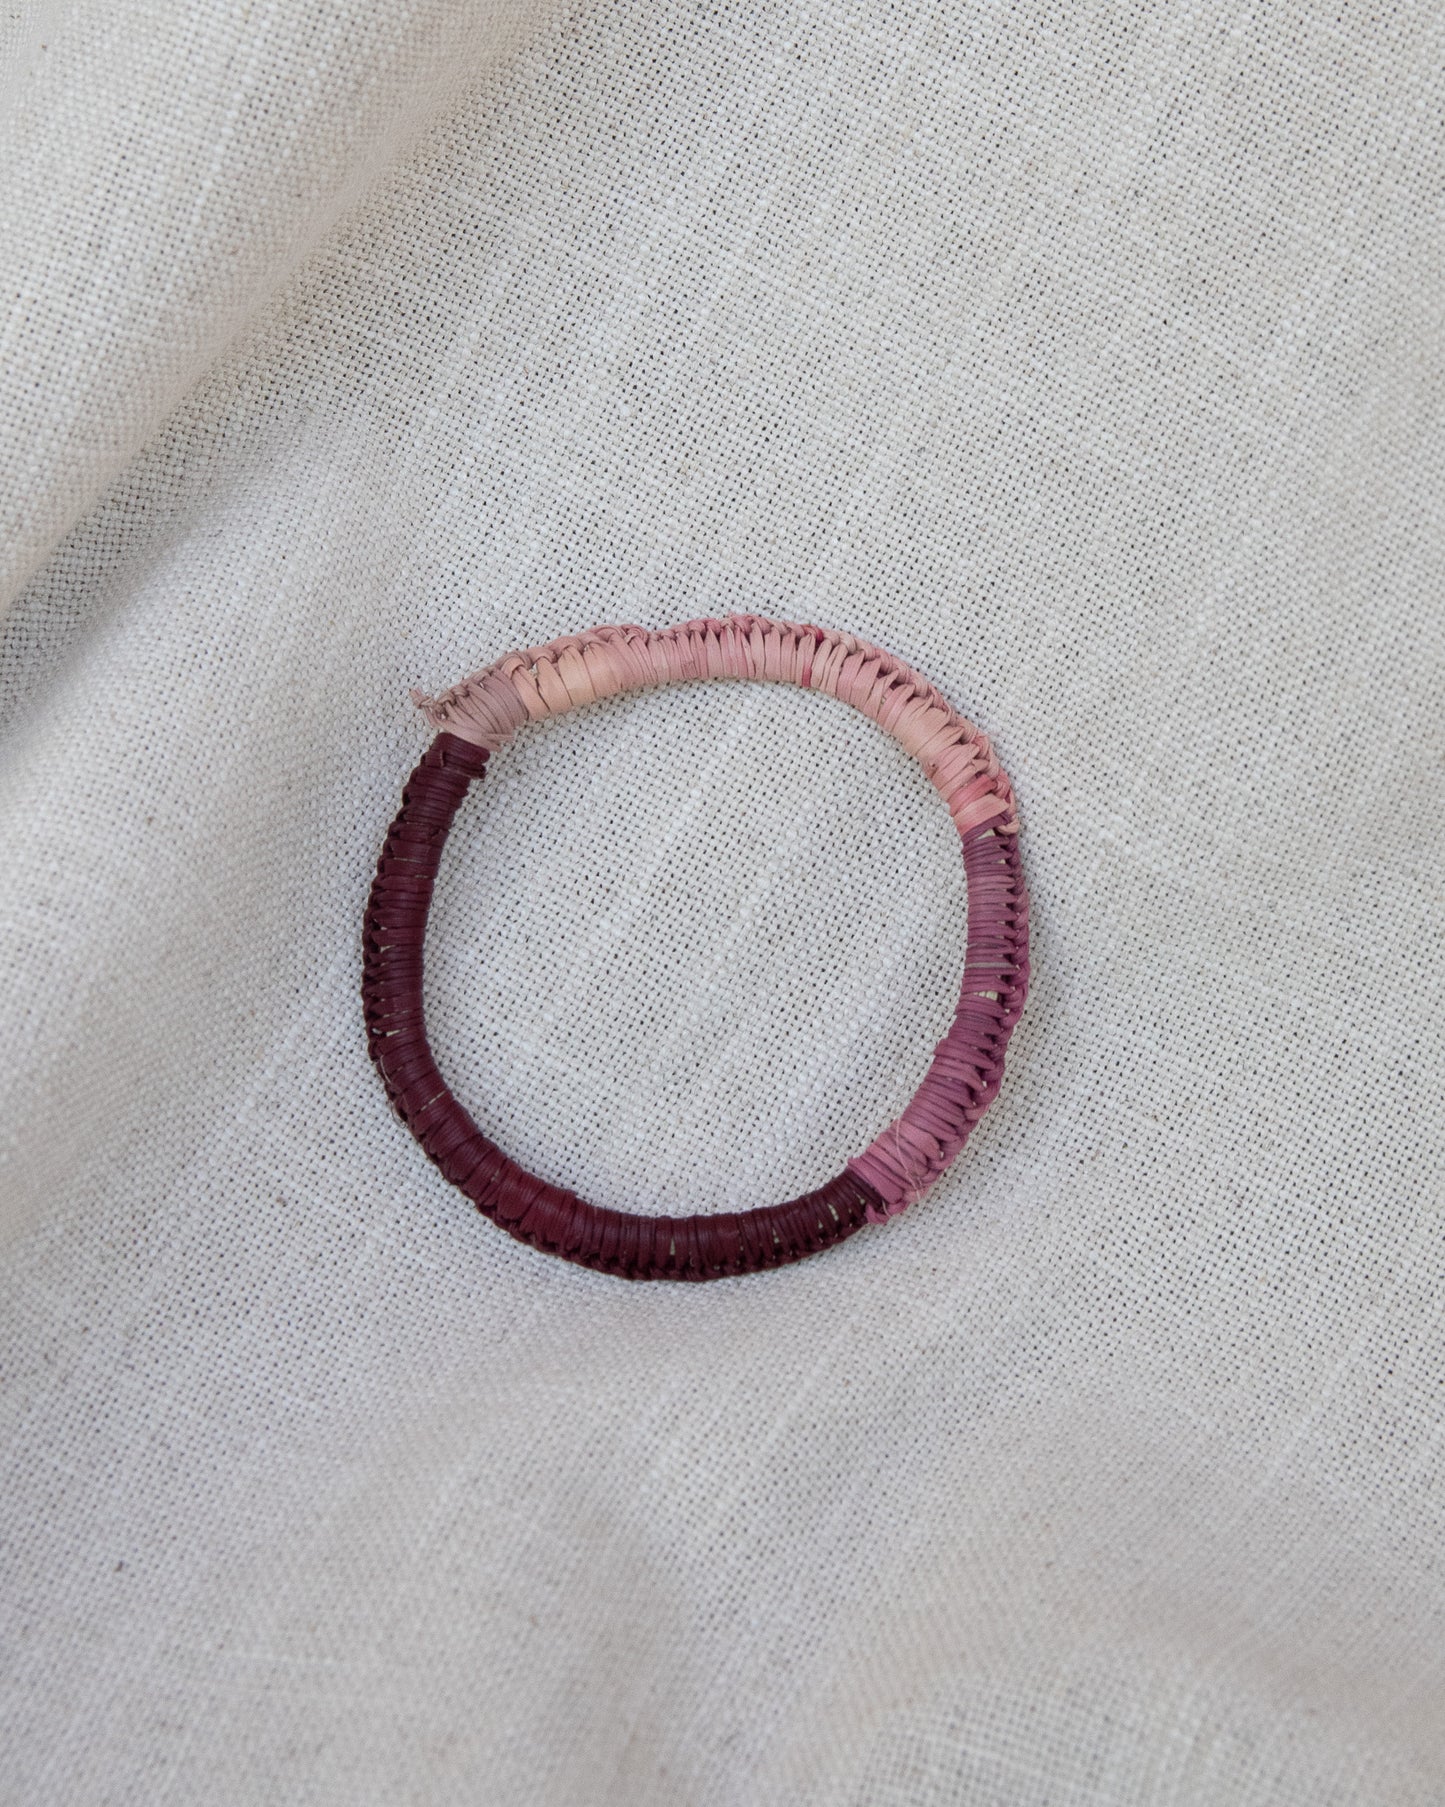 Shades or pink woven bangle by aboriginal artist